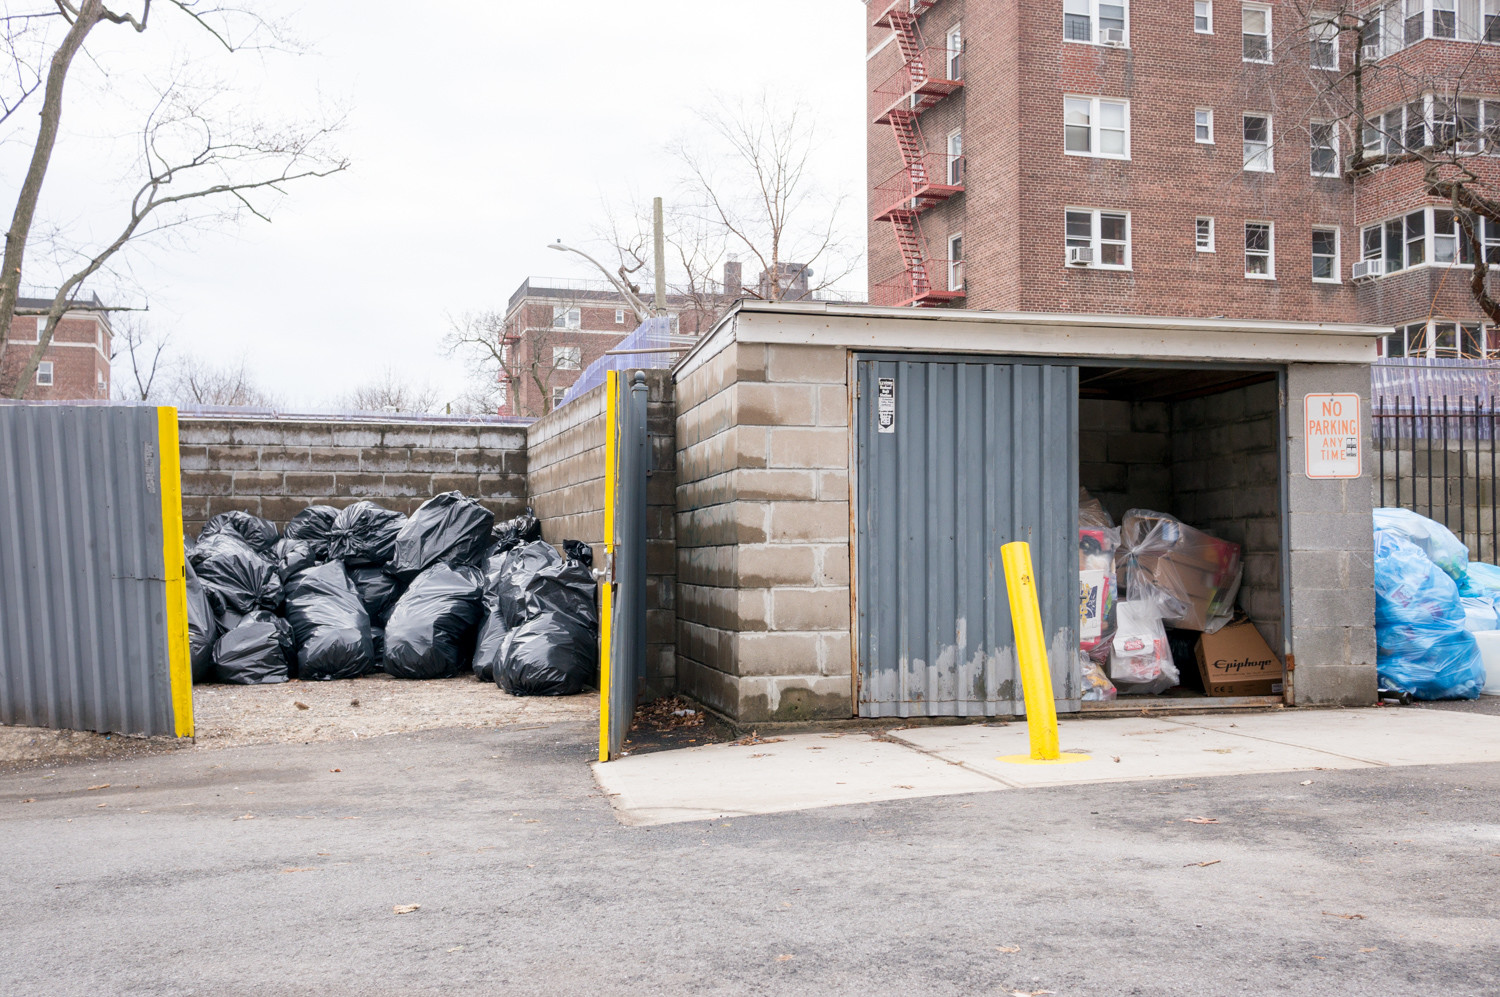 A row of dumpsters and a bleak cinderblock wall on Netherland Avenue between West 254th and West 256th streets is a major obstacle for pedestrians. But that could change if the city finally decides to add sidewalks to one side of the street.